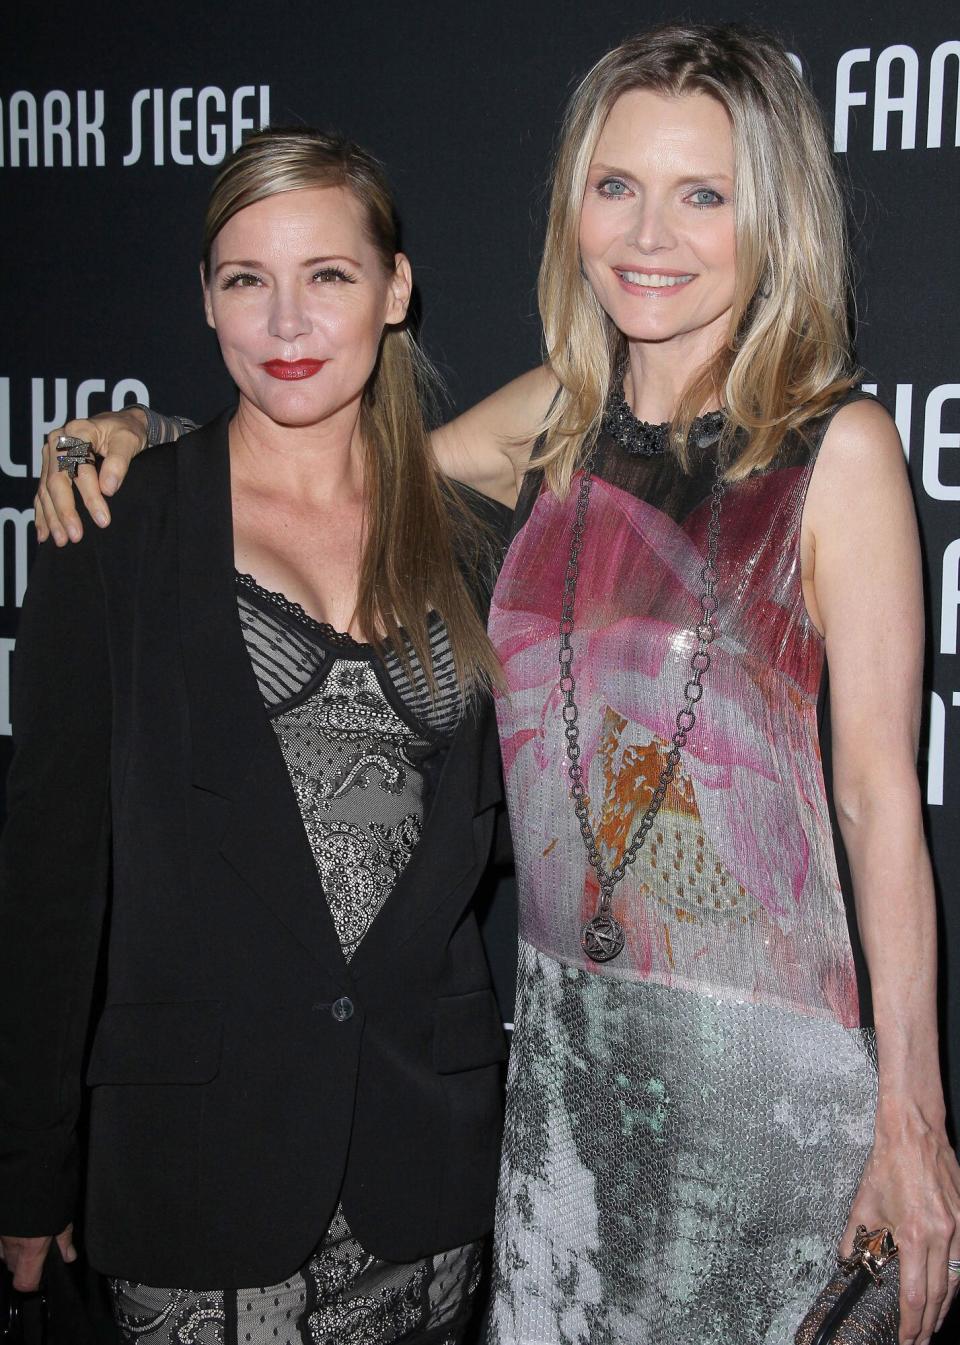 Dedee Pfeiffer and Michelle Pfeiffer 8th Annual Pink Party, Los Angeles, America - 27 Oct 2012